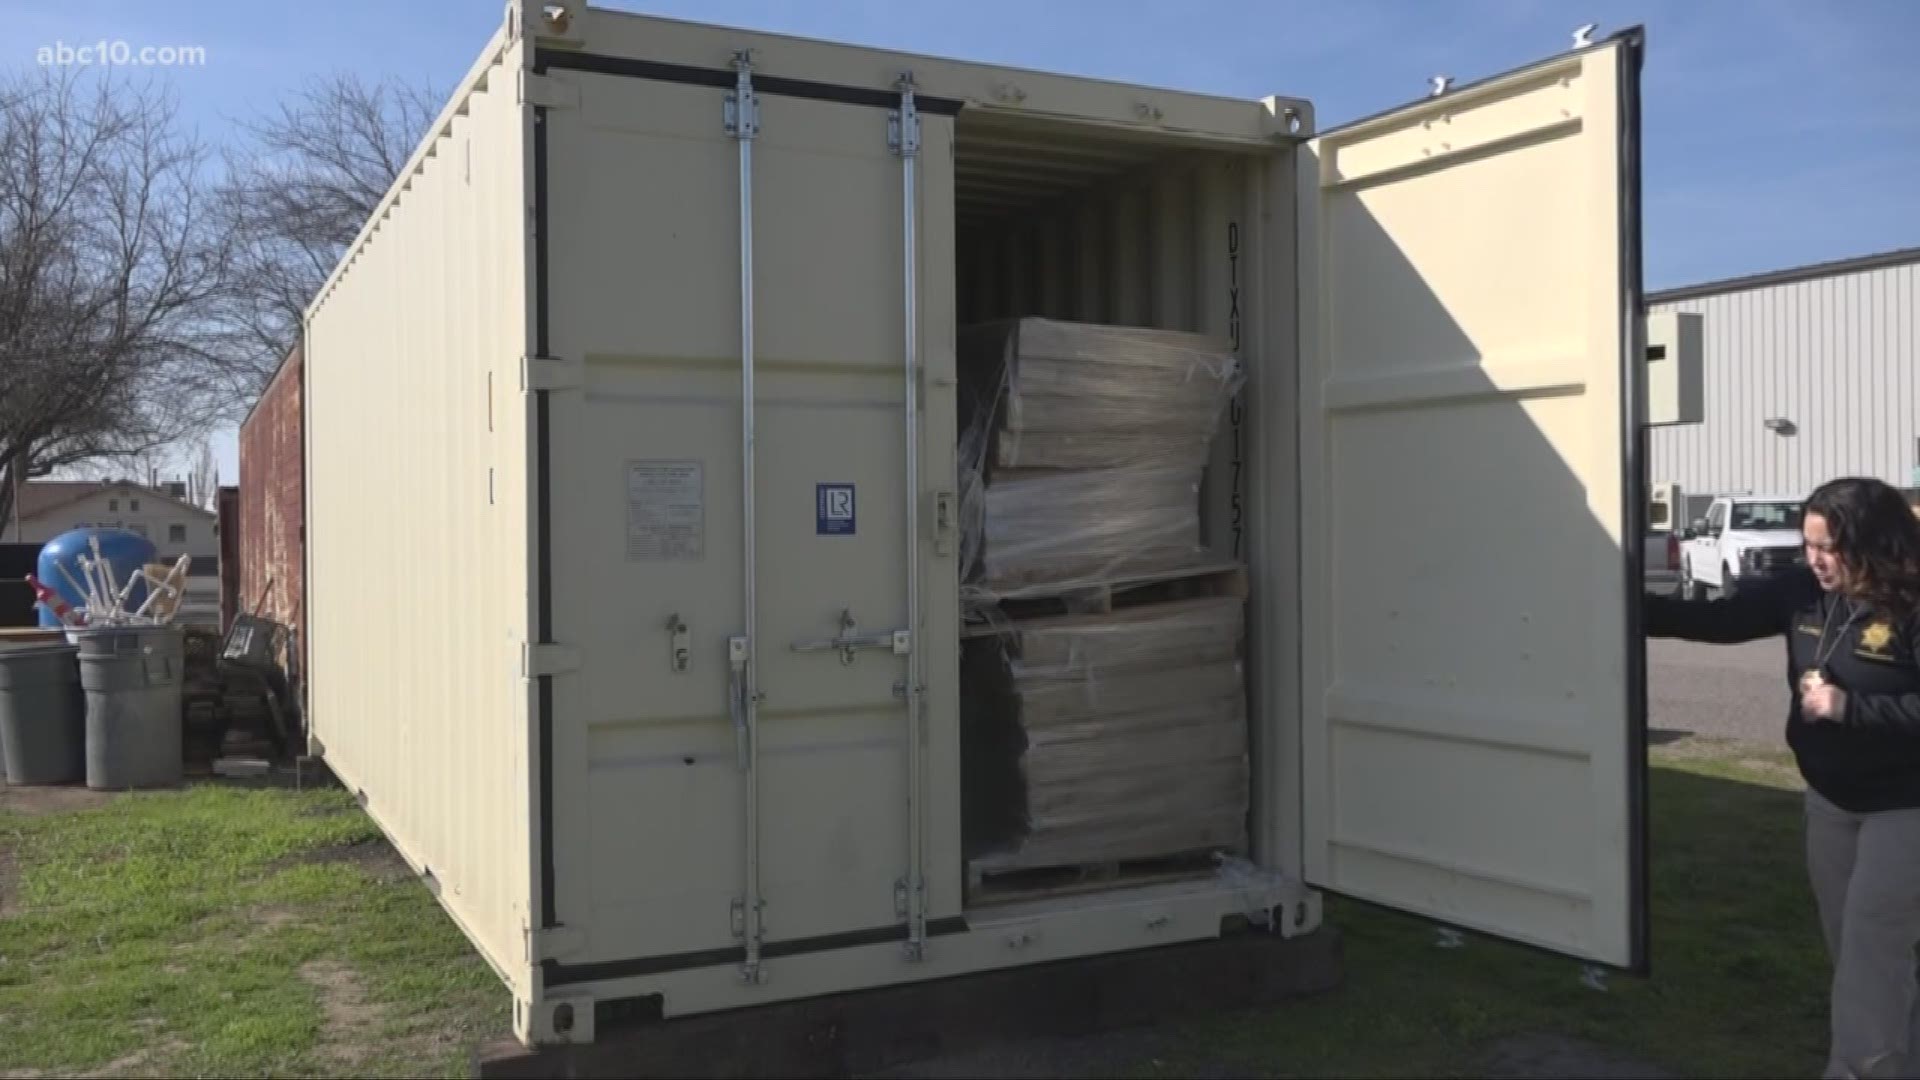 The storage container will have supplies for emergency animal services.